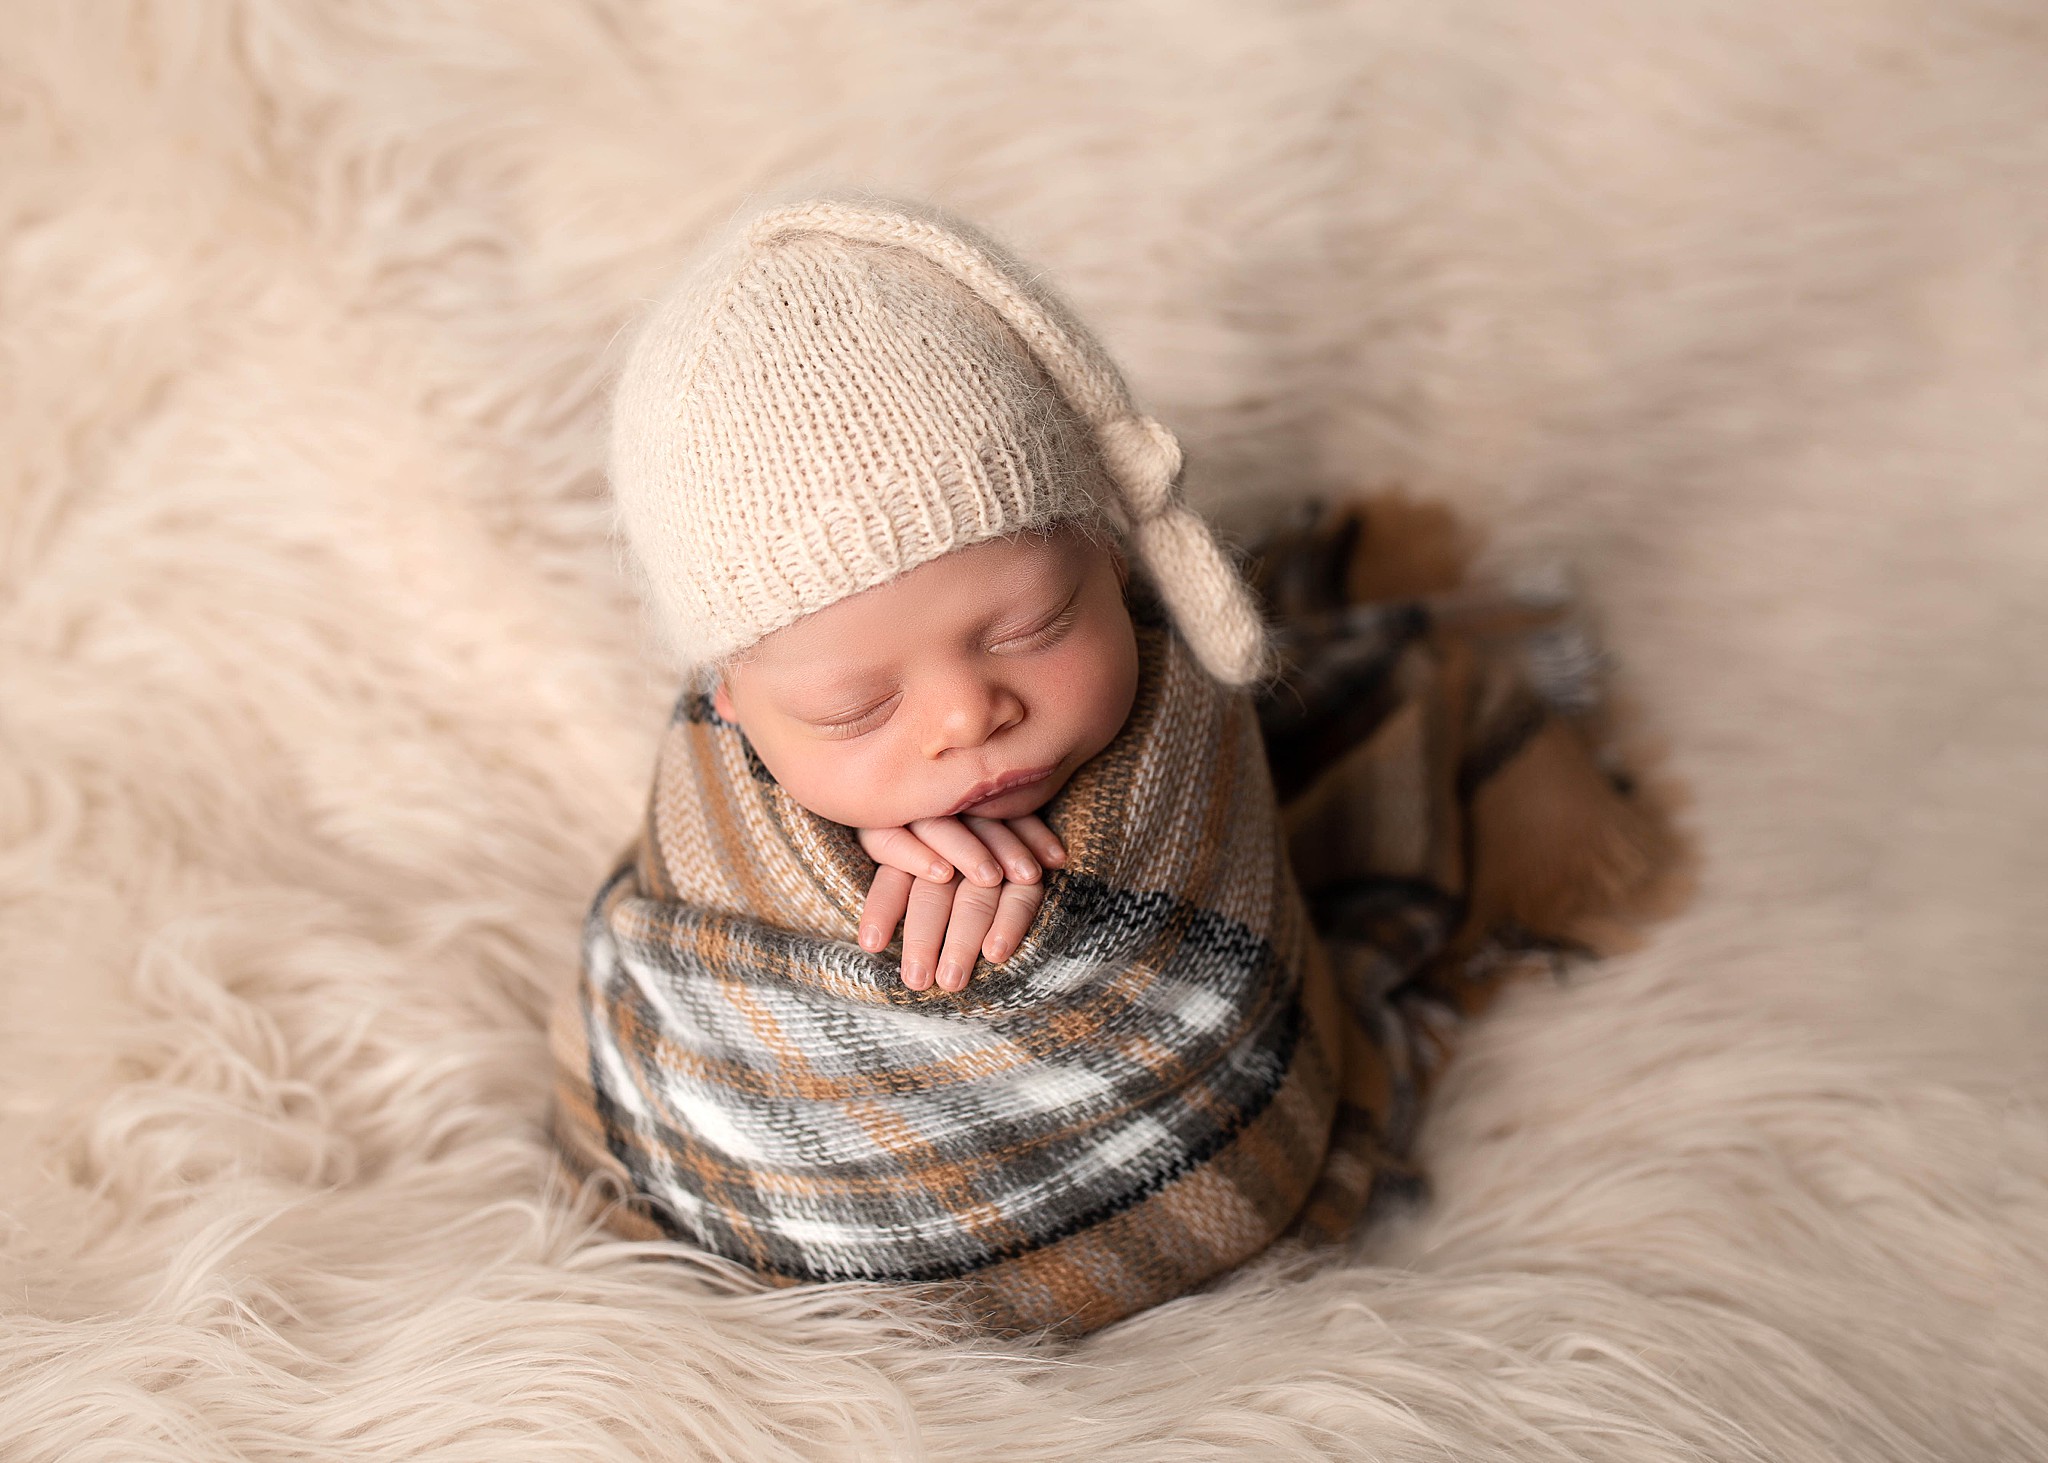 A kamloops newborn photographer captures a sleeping baby boy who is wrapped up in a plaid blanket